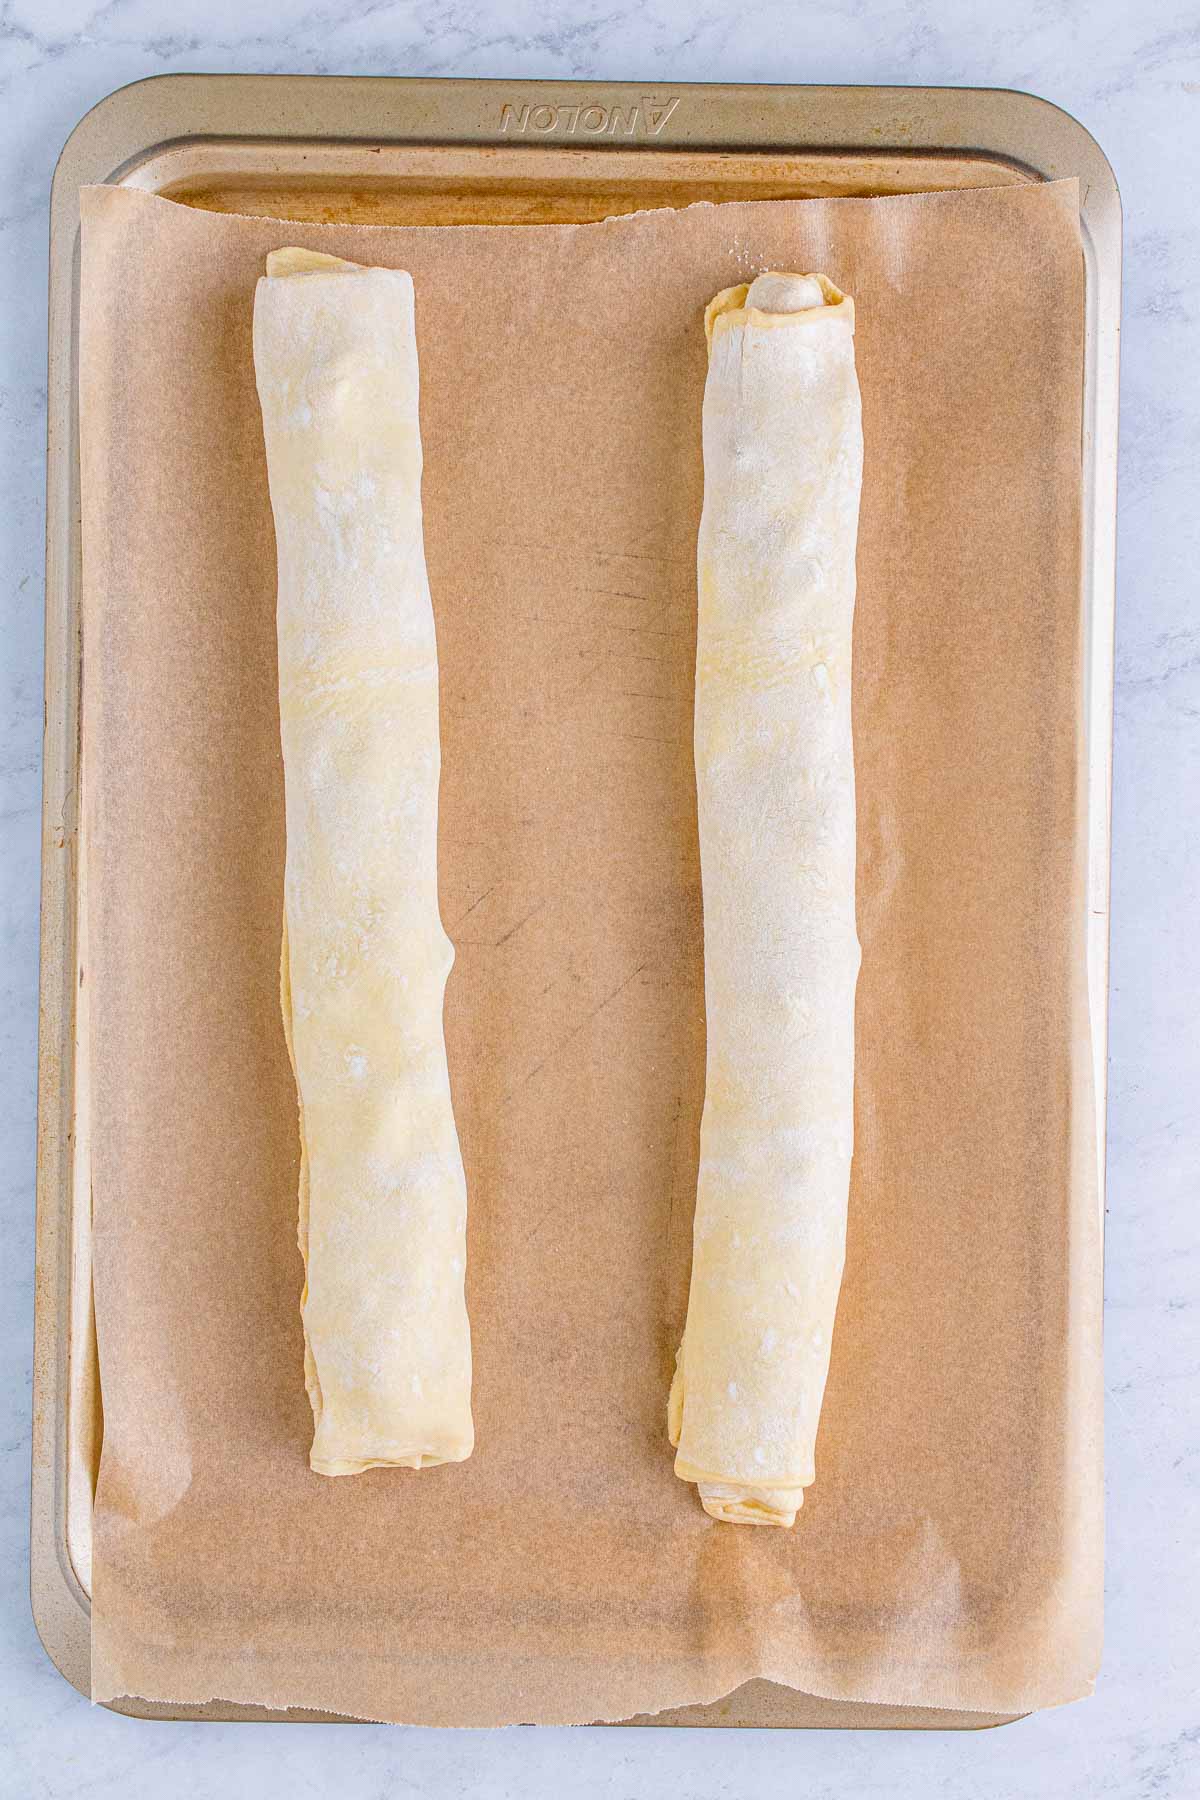 rolled up puff pastry on a baking sheet